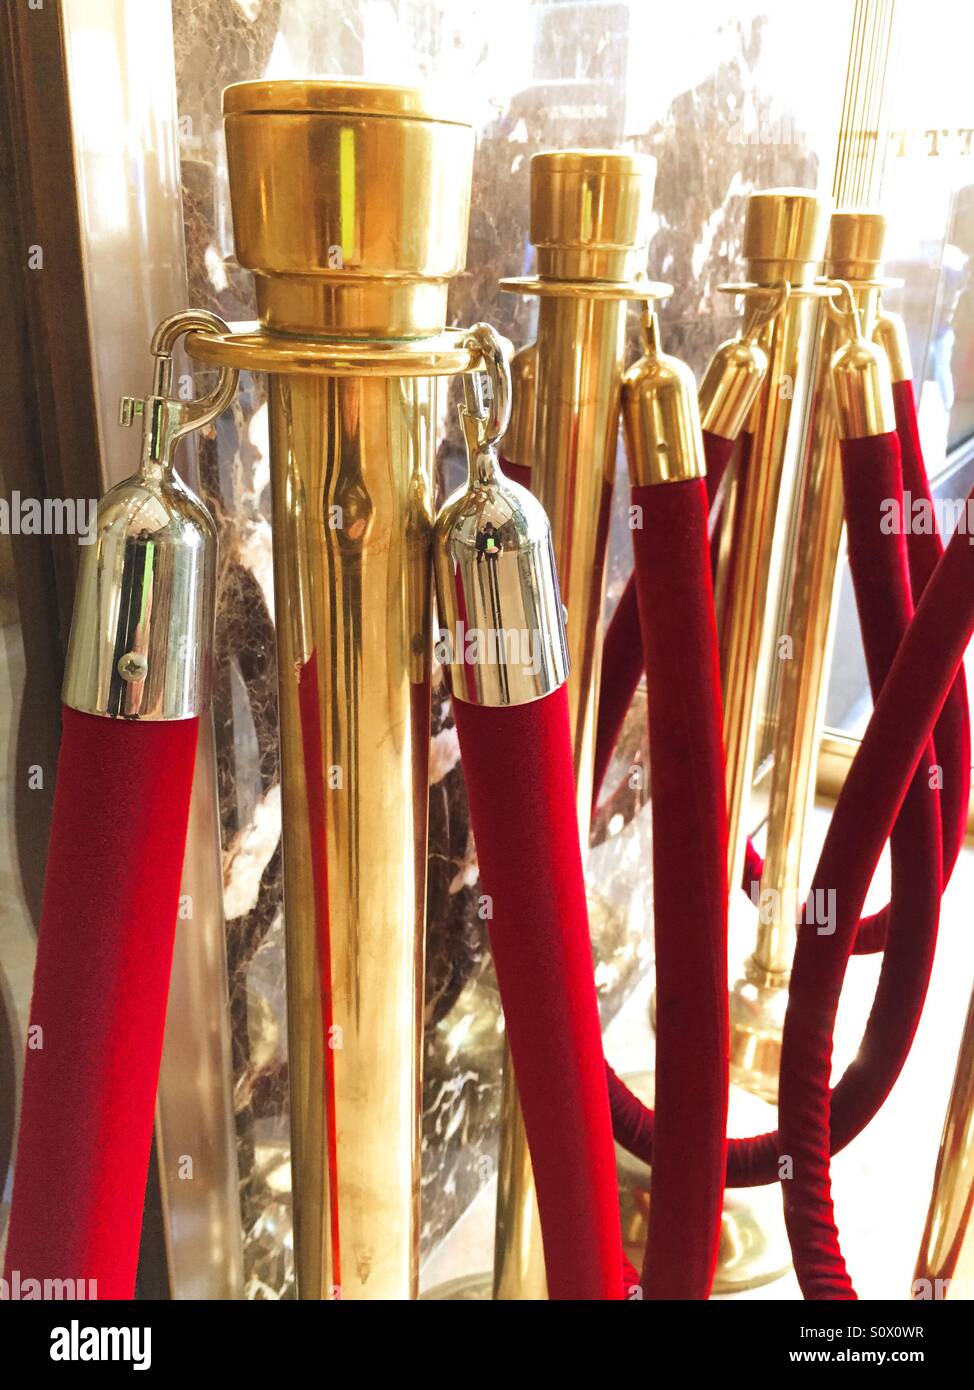 Red velvet ropes and brass stanchions signify exclusivity. Stock Photo